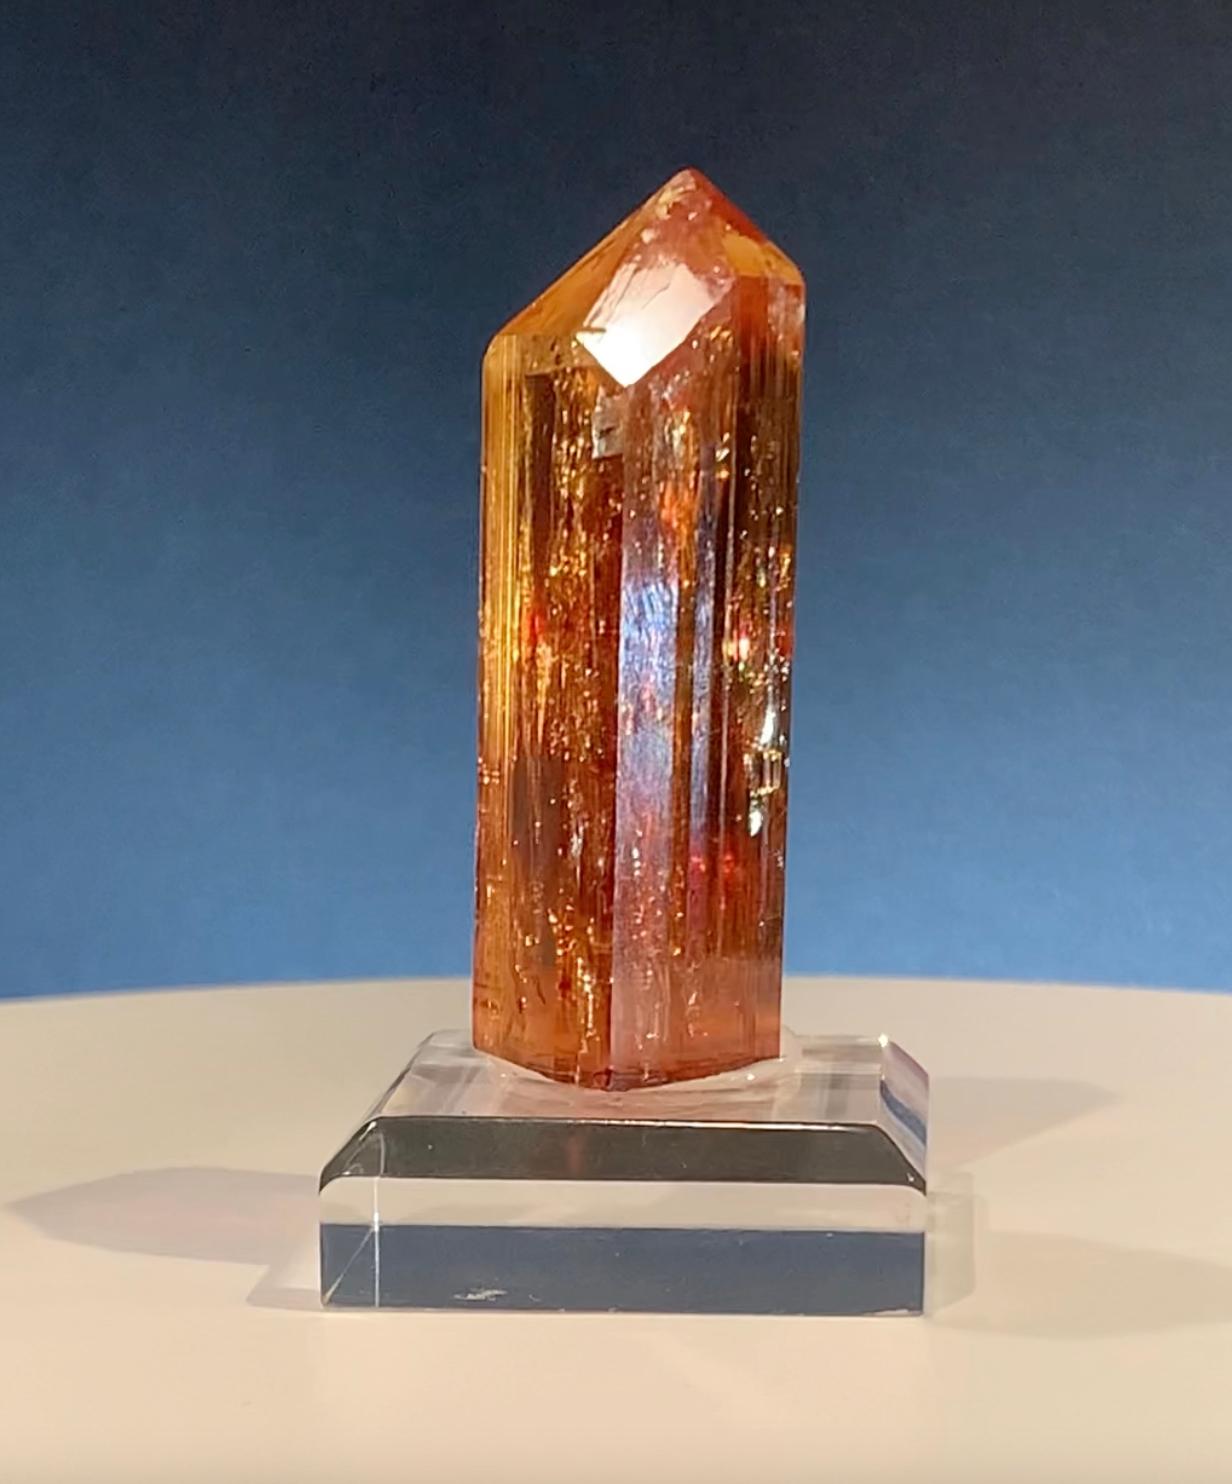 This unbelievable 81 gram (base included) imperial topaz from Ouro Preto, Brazil – where most of the world's rare, true orange-red imperial topazes are sourced – features a flawless termination, absolutely astonishing color, and great luster. Pieces